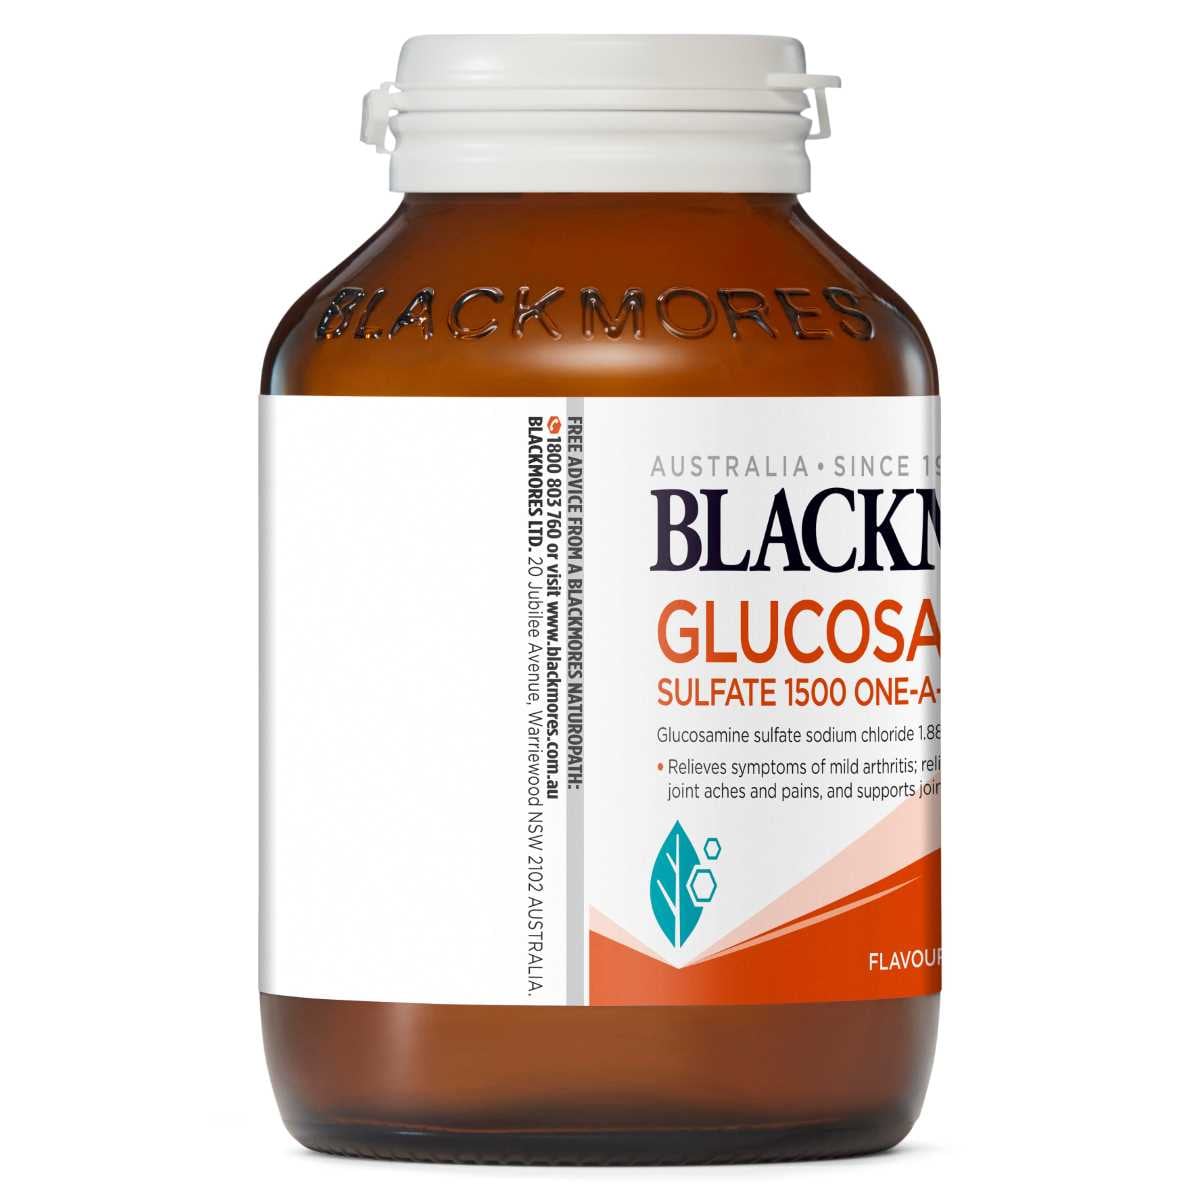 Blackmores Glucosamine Sulfate 1500mg One-a-day 90 Tablets